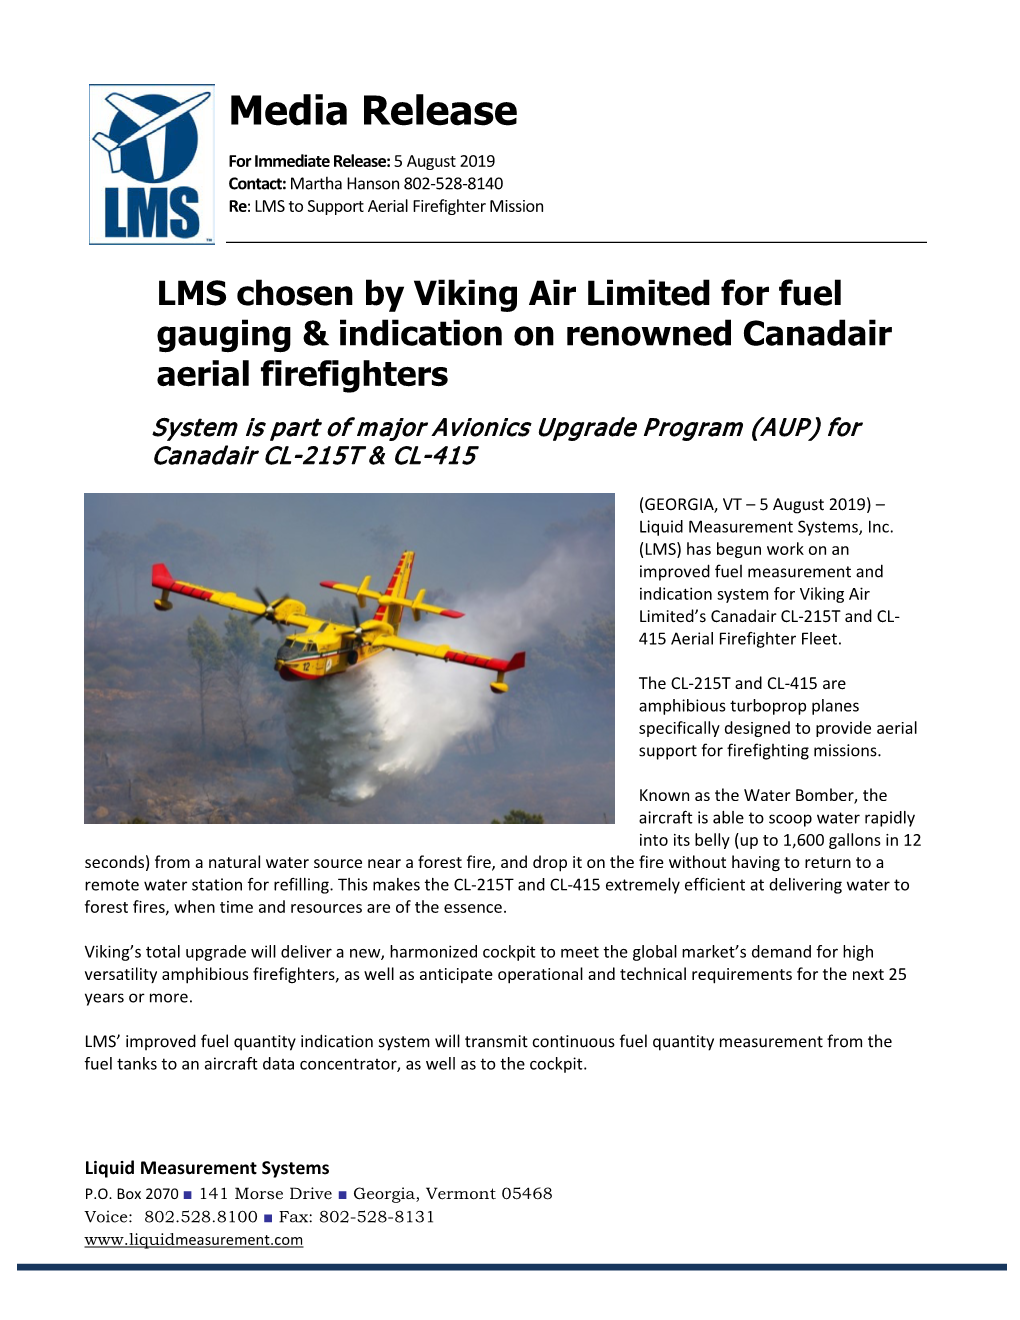 Media Release for Immediate Release: 5 August 2019 Contact: Martha Hanson 802-528-8140 Re: LMS to Support Aerial Firefighter Mission